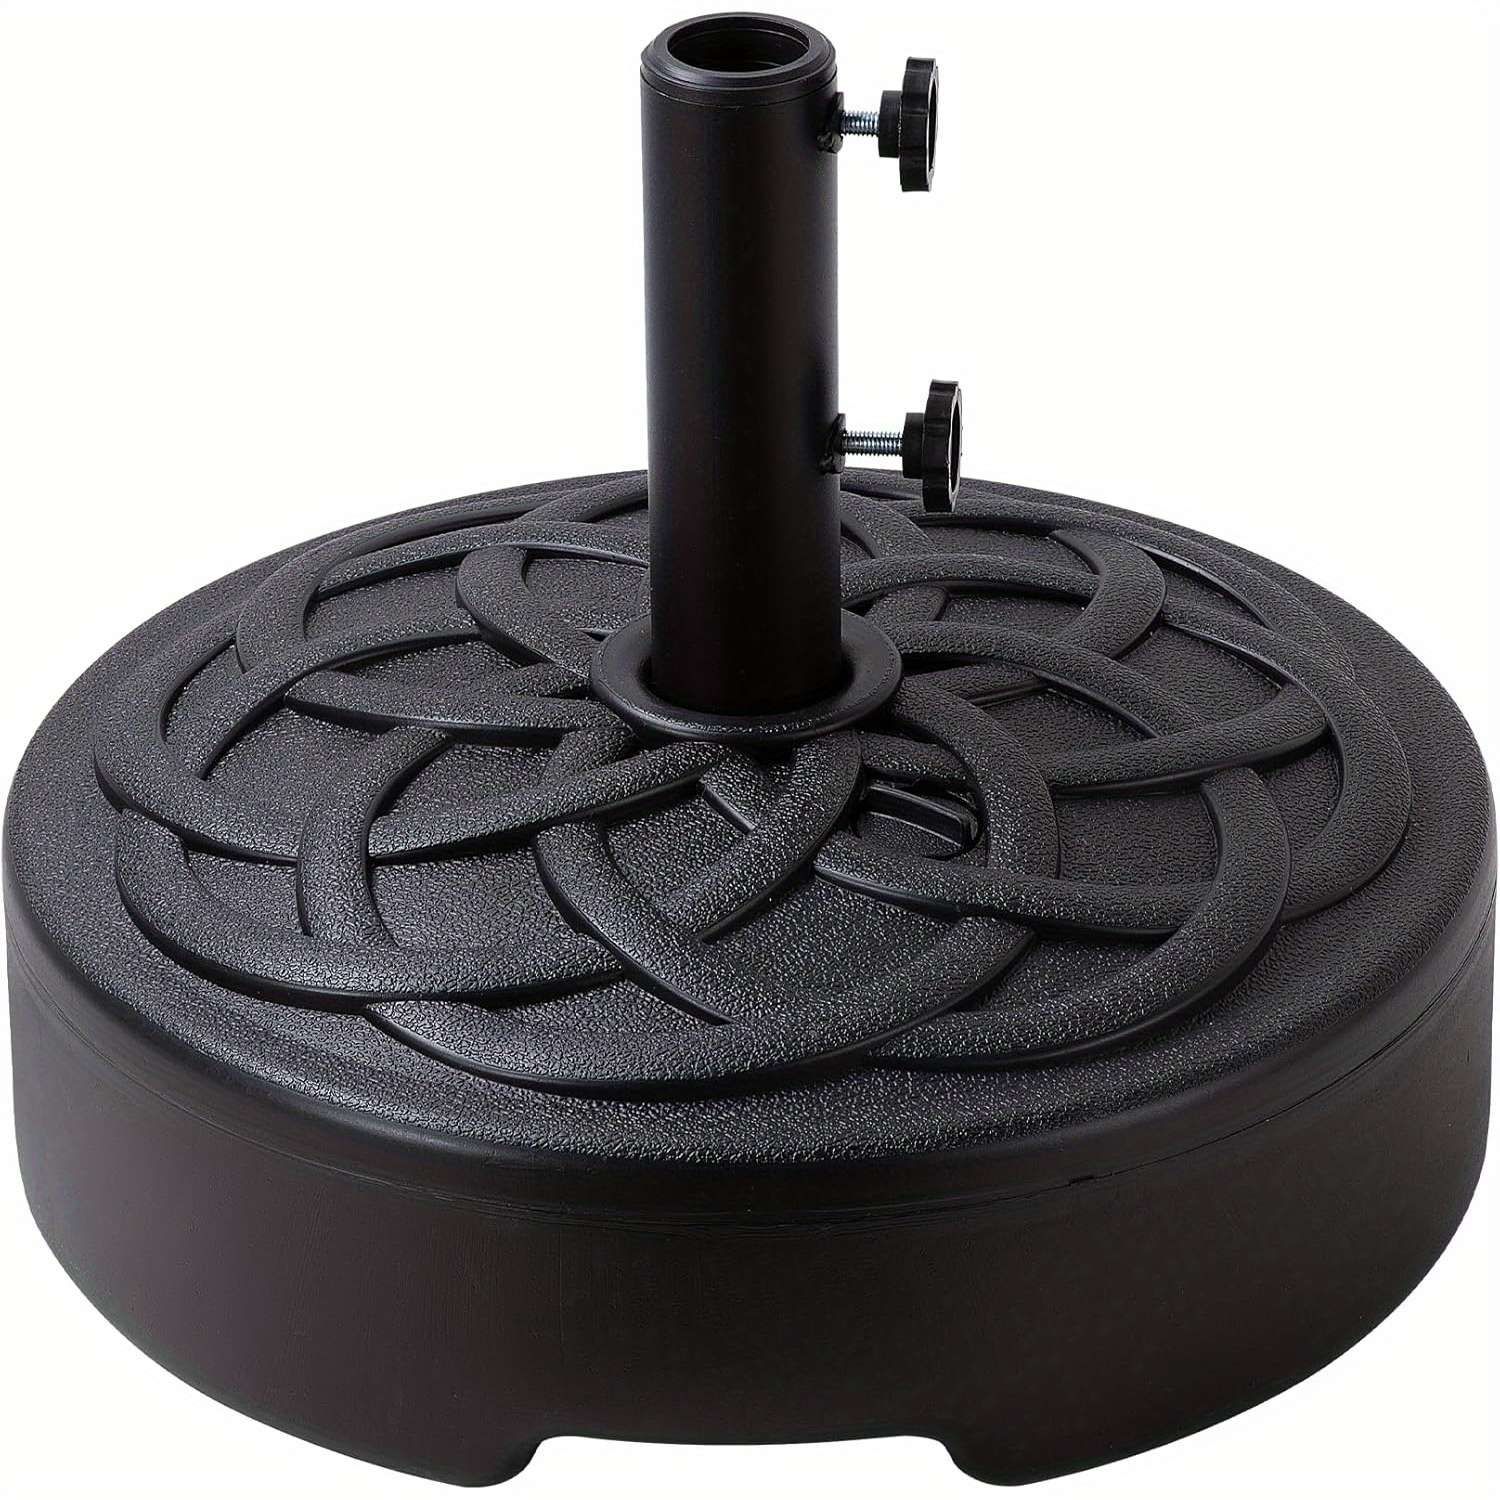 

Patio Market Umbrella Base Round Heavy Duty Outdoor Stand Pole Holder, Outdoor Umbrella Base With 2 Adjustment Knobs, Umbrella Stand Base Add To 44lbs